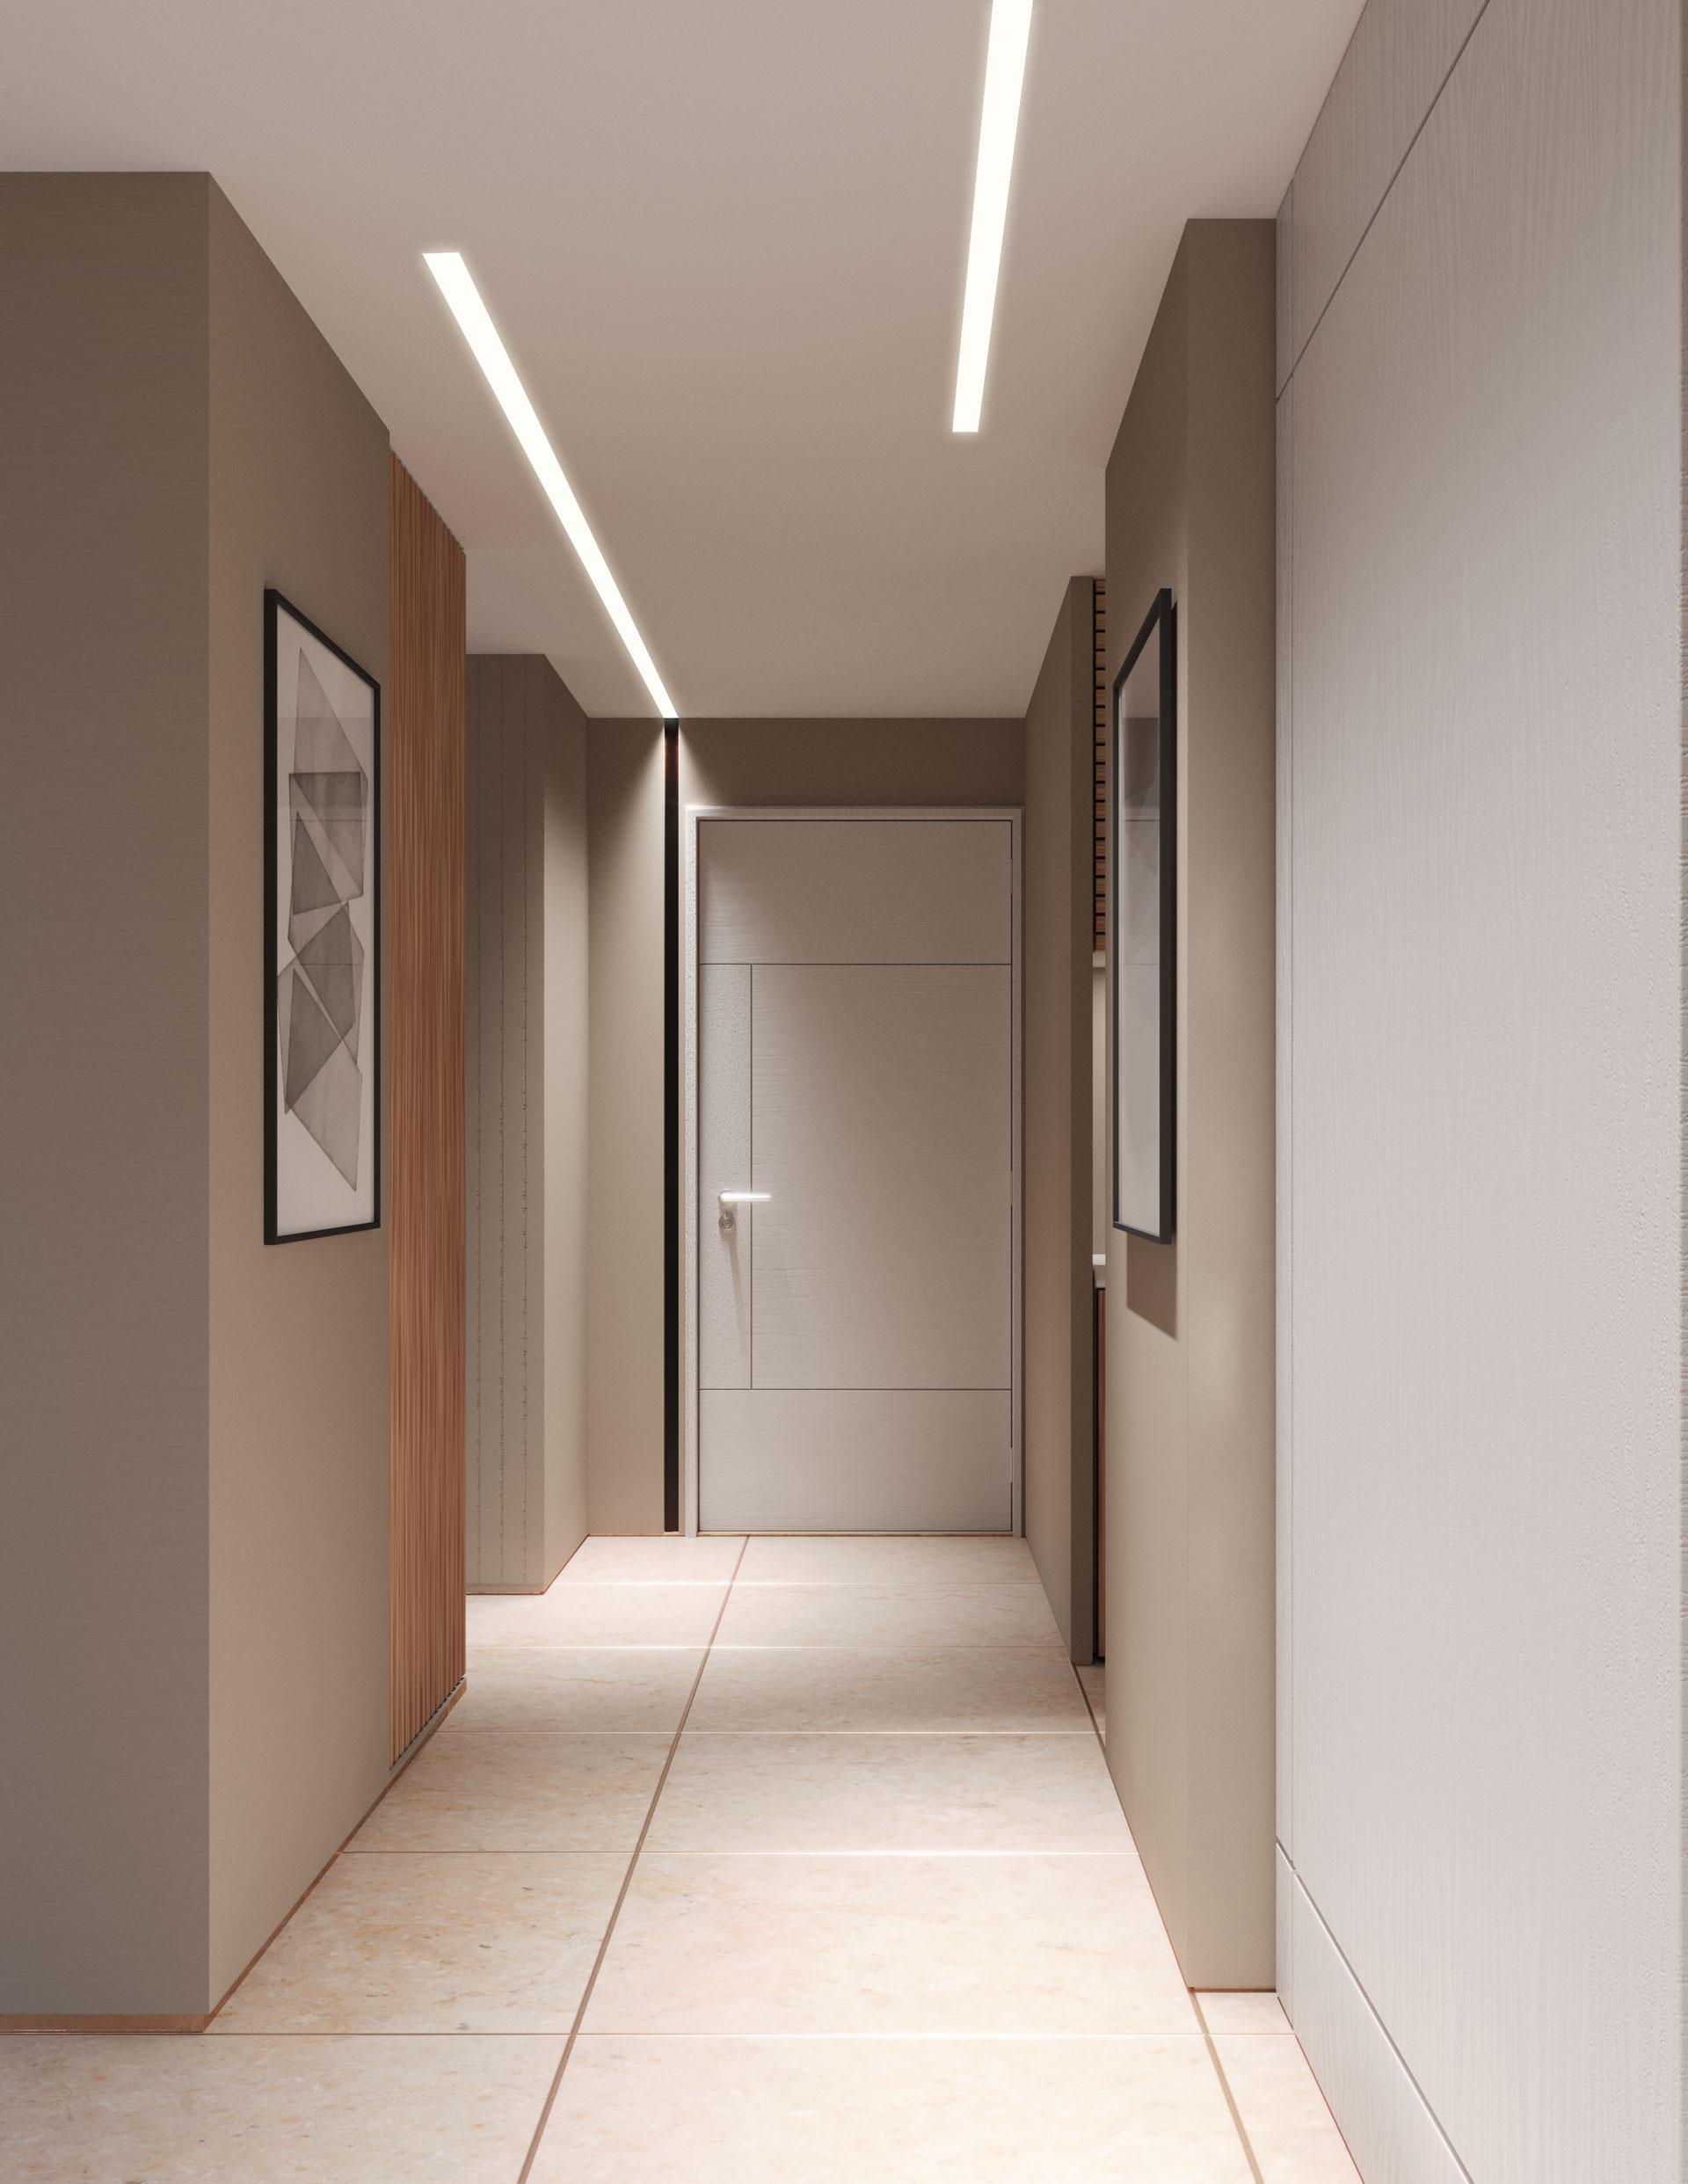 Recessed ceiling light in the hall